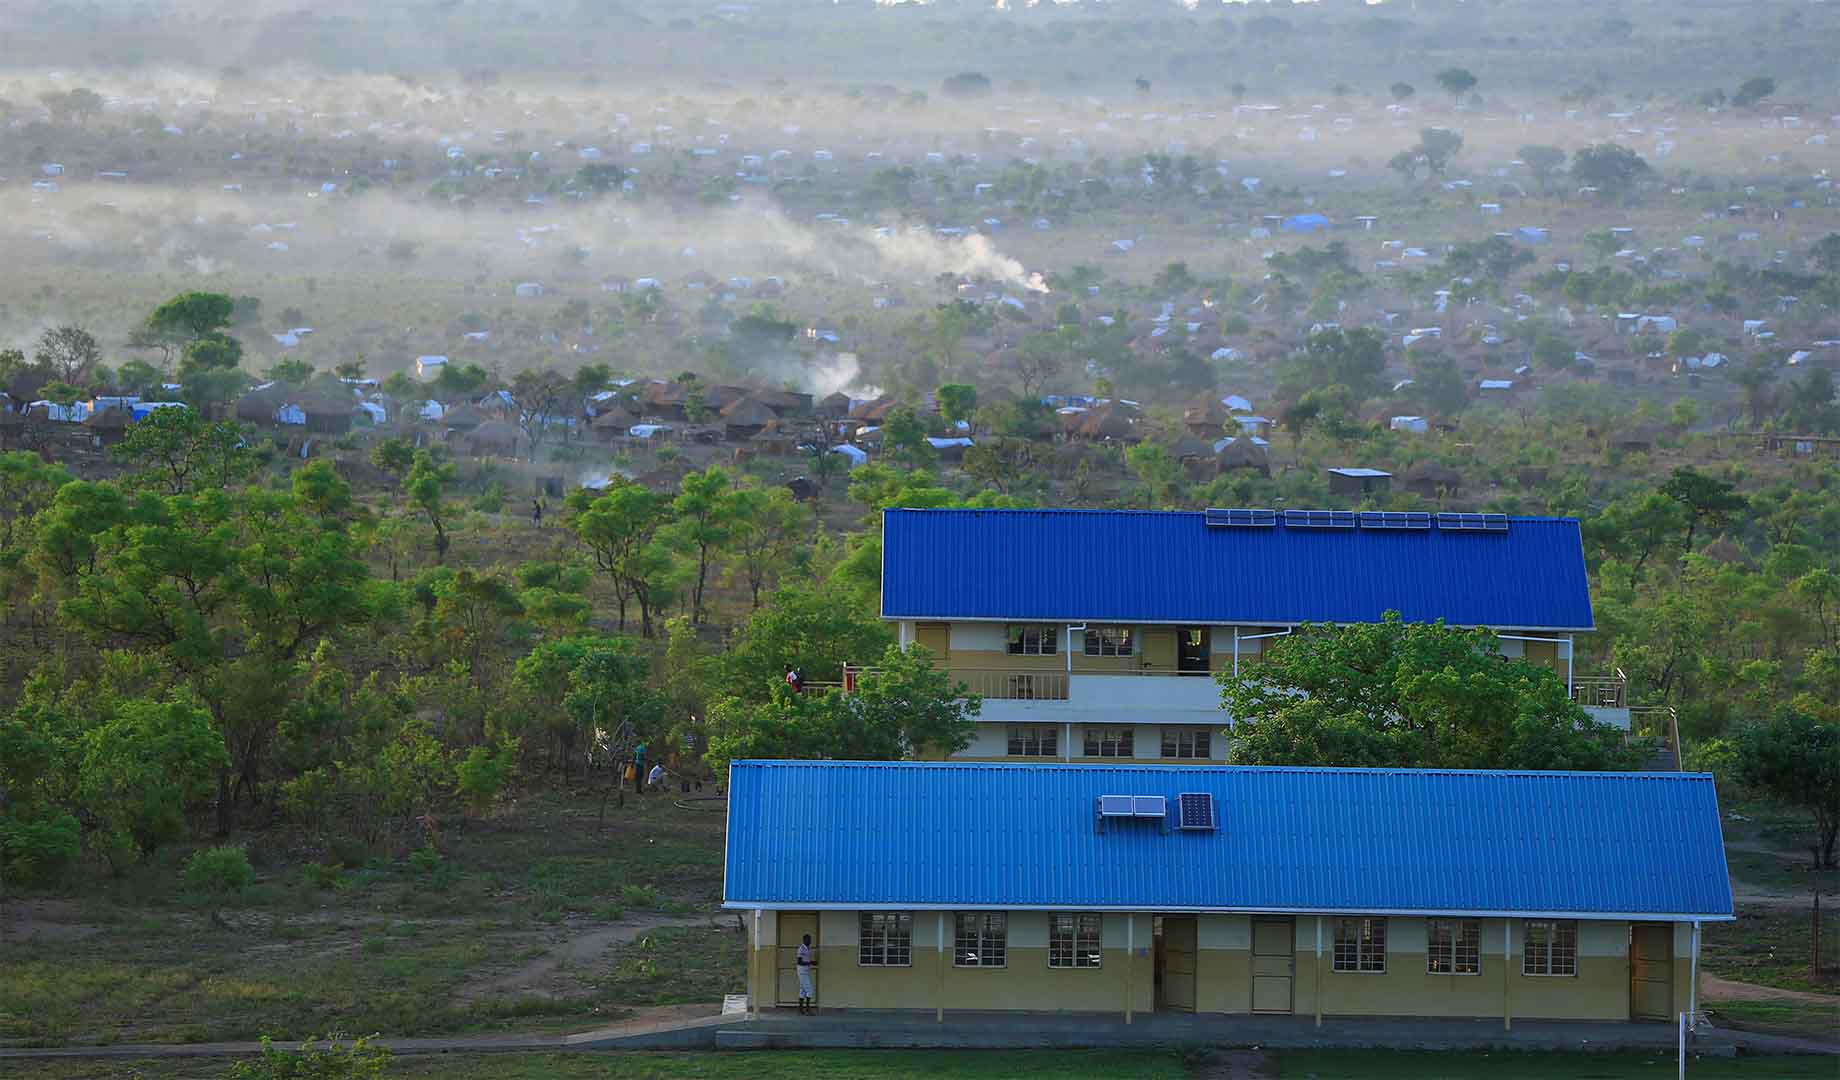 An aerial view of Bidi Bidi refugee settlement taken on 5 April 2017 amid the arrival of South Sudanese families fleeing war. In the foreground we see a building with a blue roof. In the backdrop dozens of tents. 